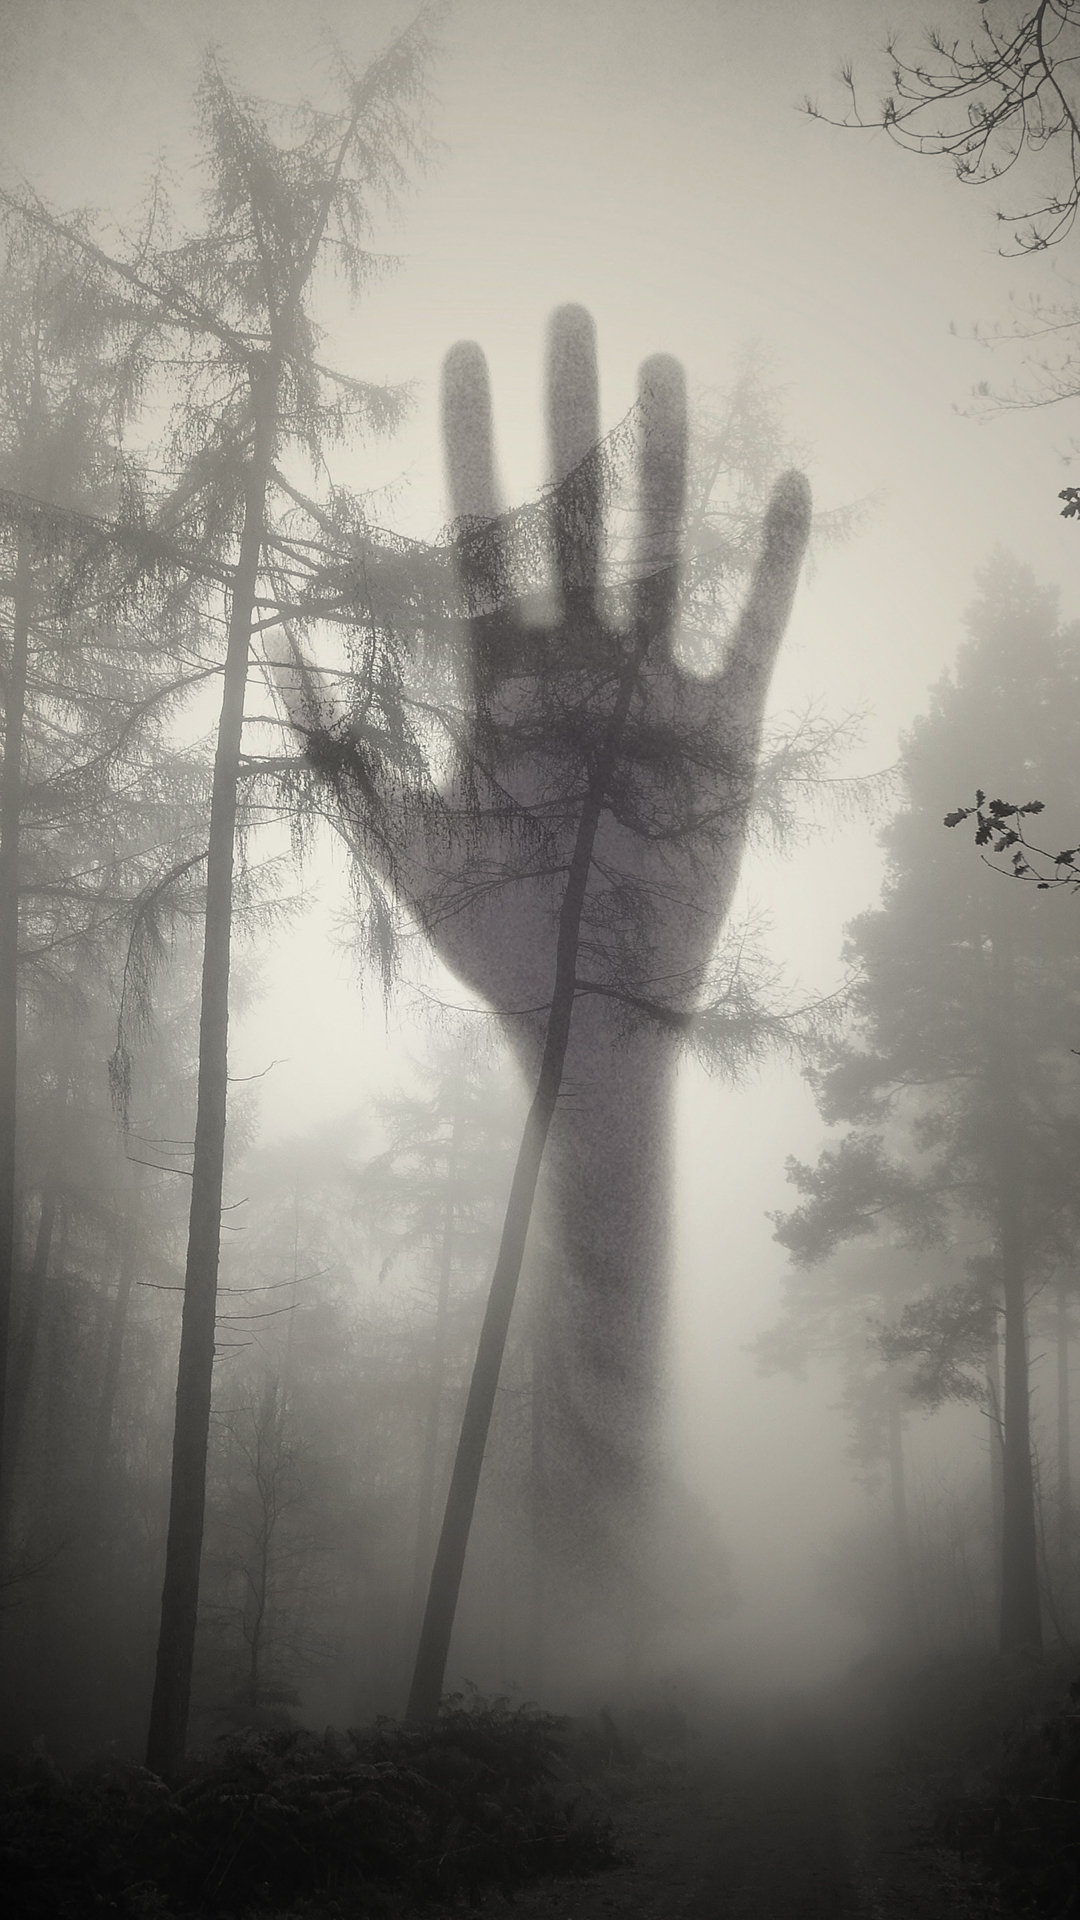 scary phone wallpapers,atmospheric phenomenon,tree,mist,black and white,hand